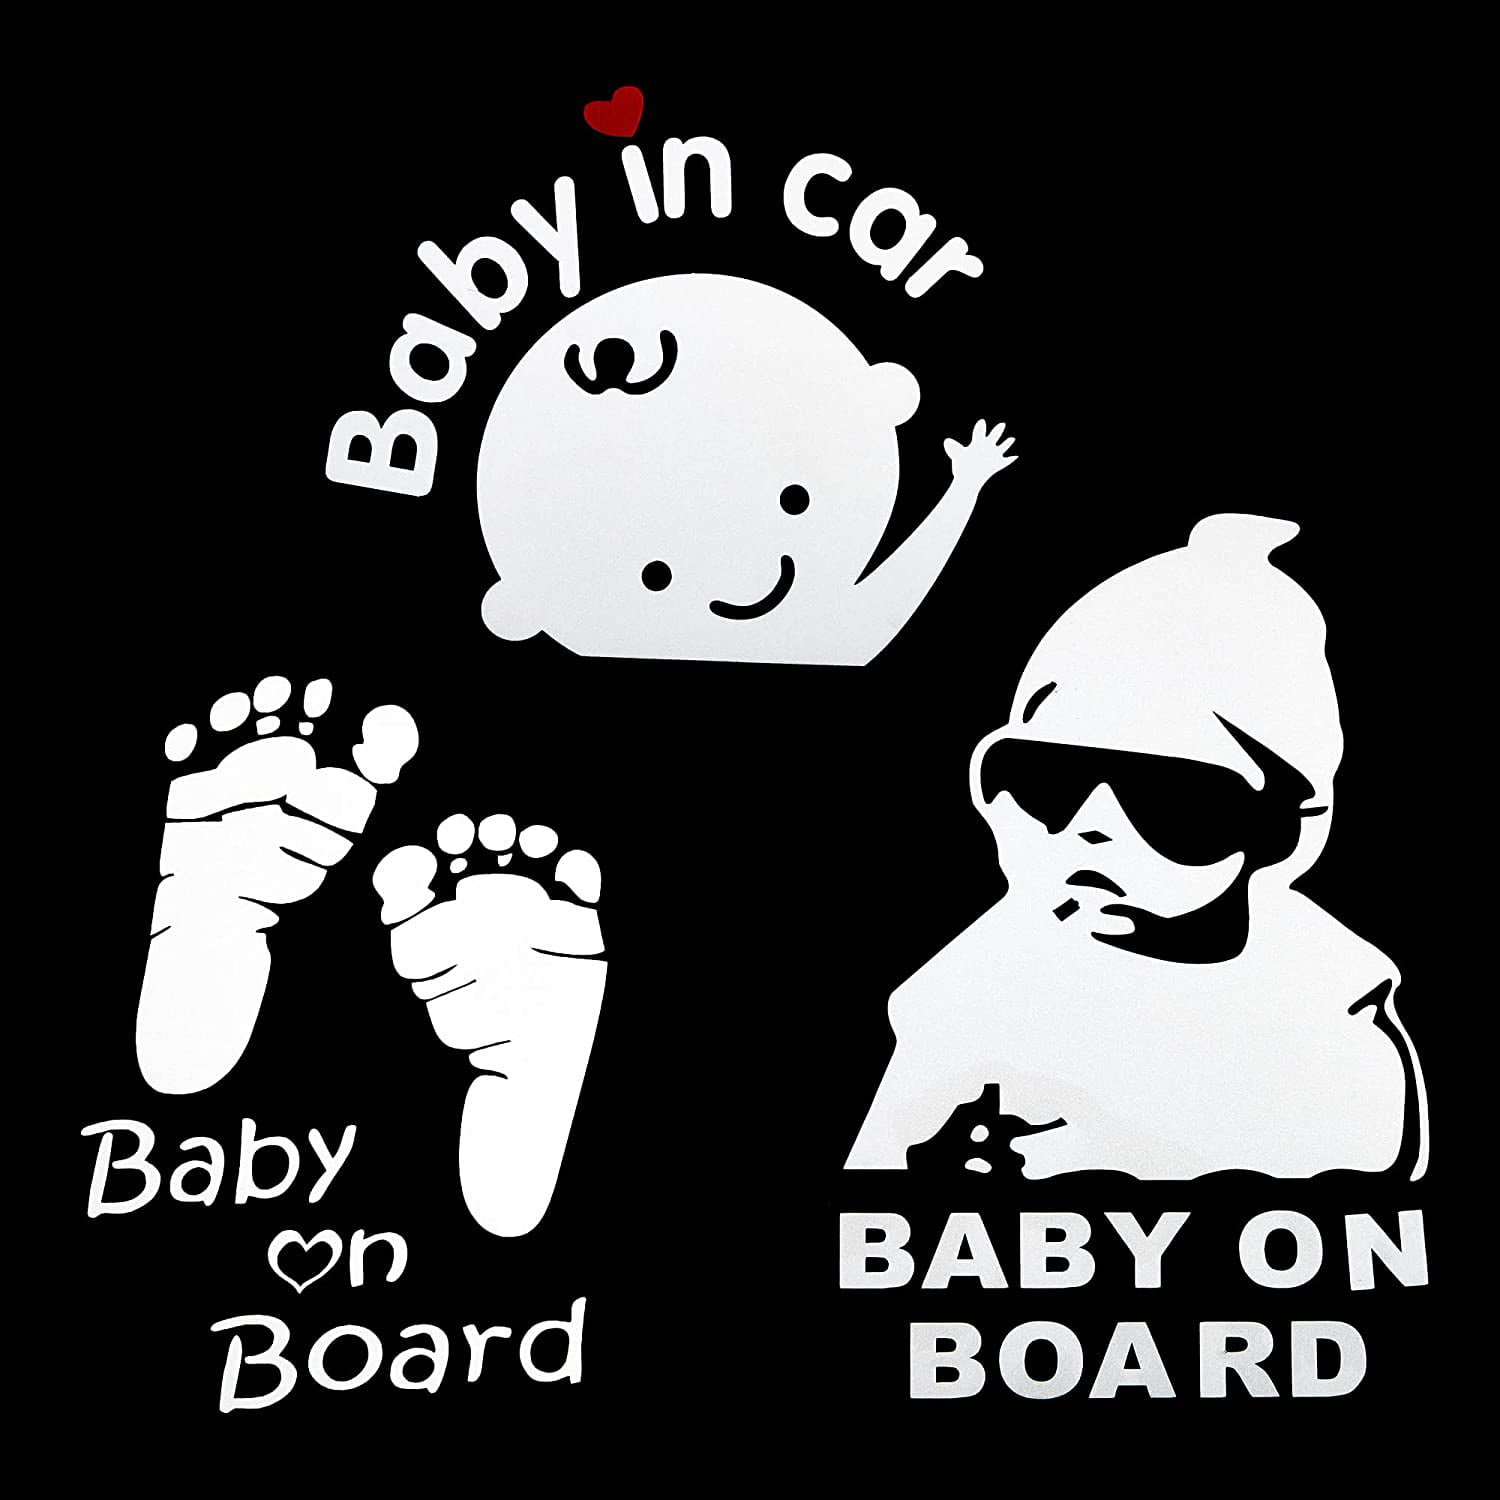 Caution Decals Reflective Kids Safety Warning Sticker Marks for Driver Heat Resistant Long Lasting Baby on Board Sign for Car Waterproof-Colorful 